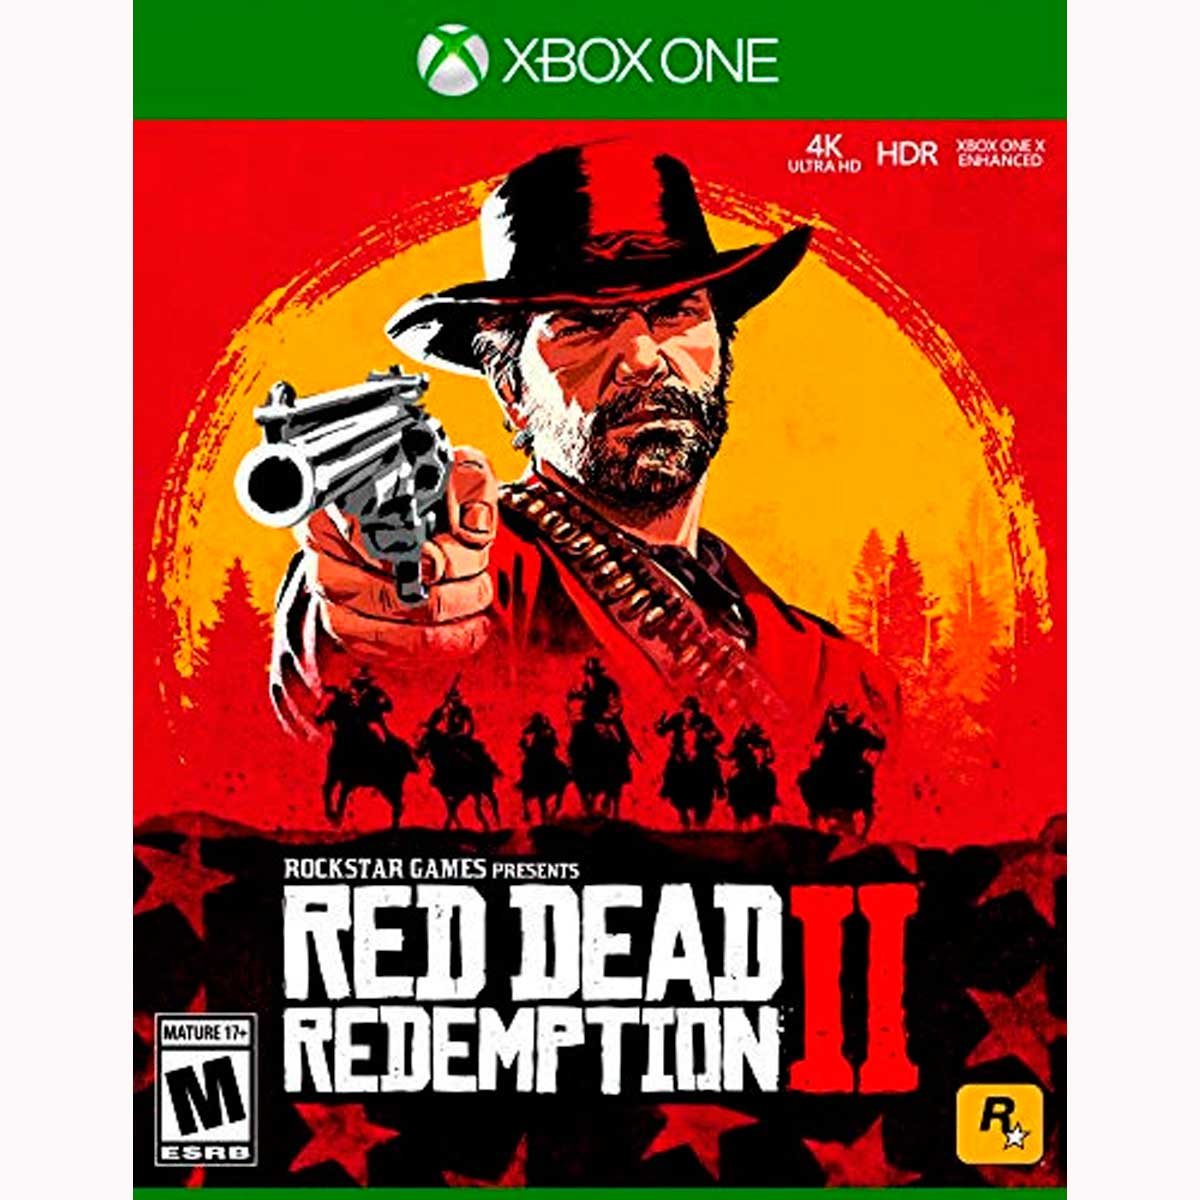 Xbox One Red Dead Redemption 2